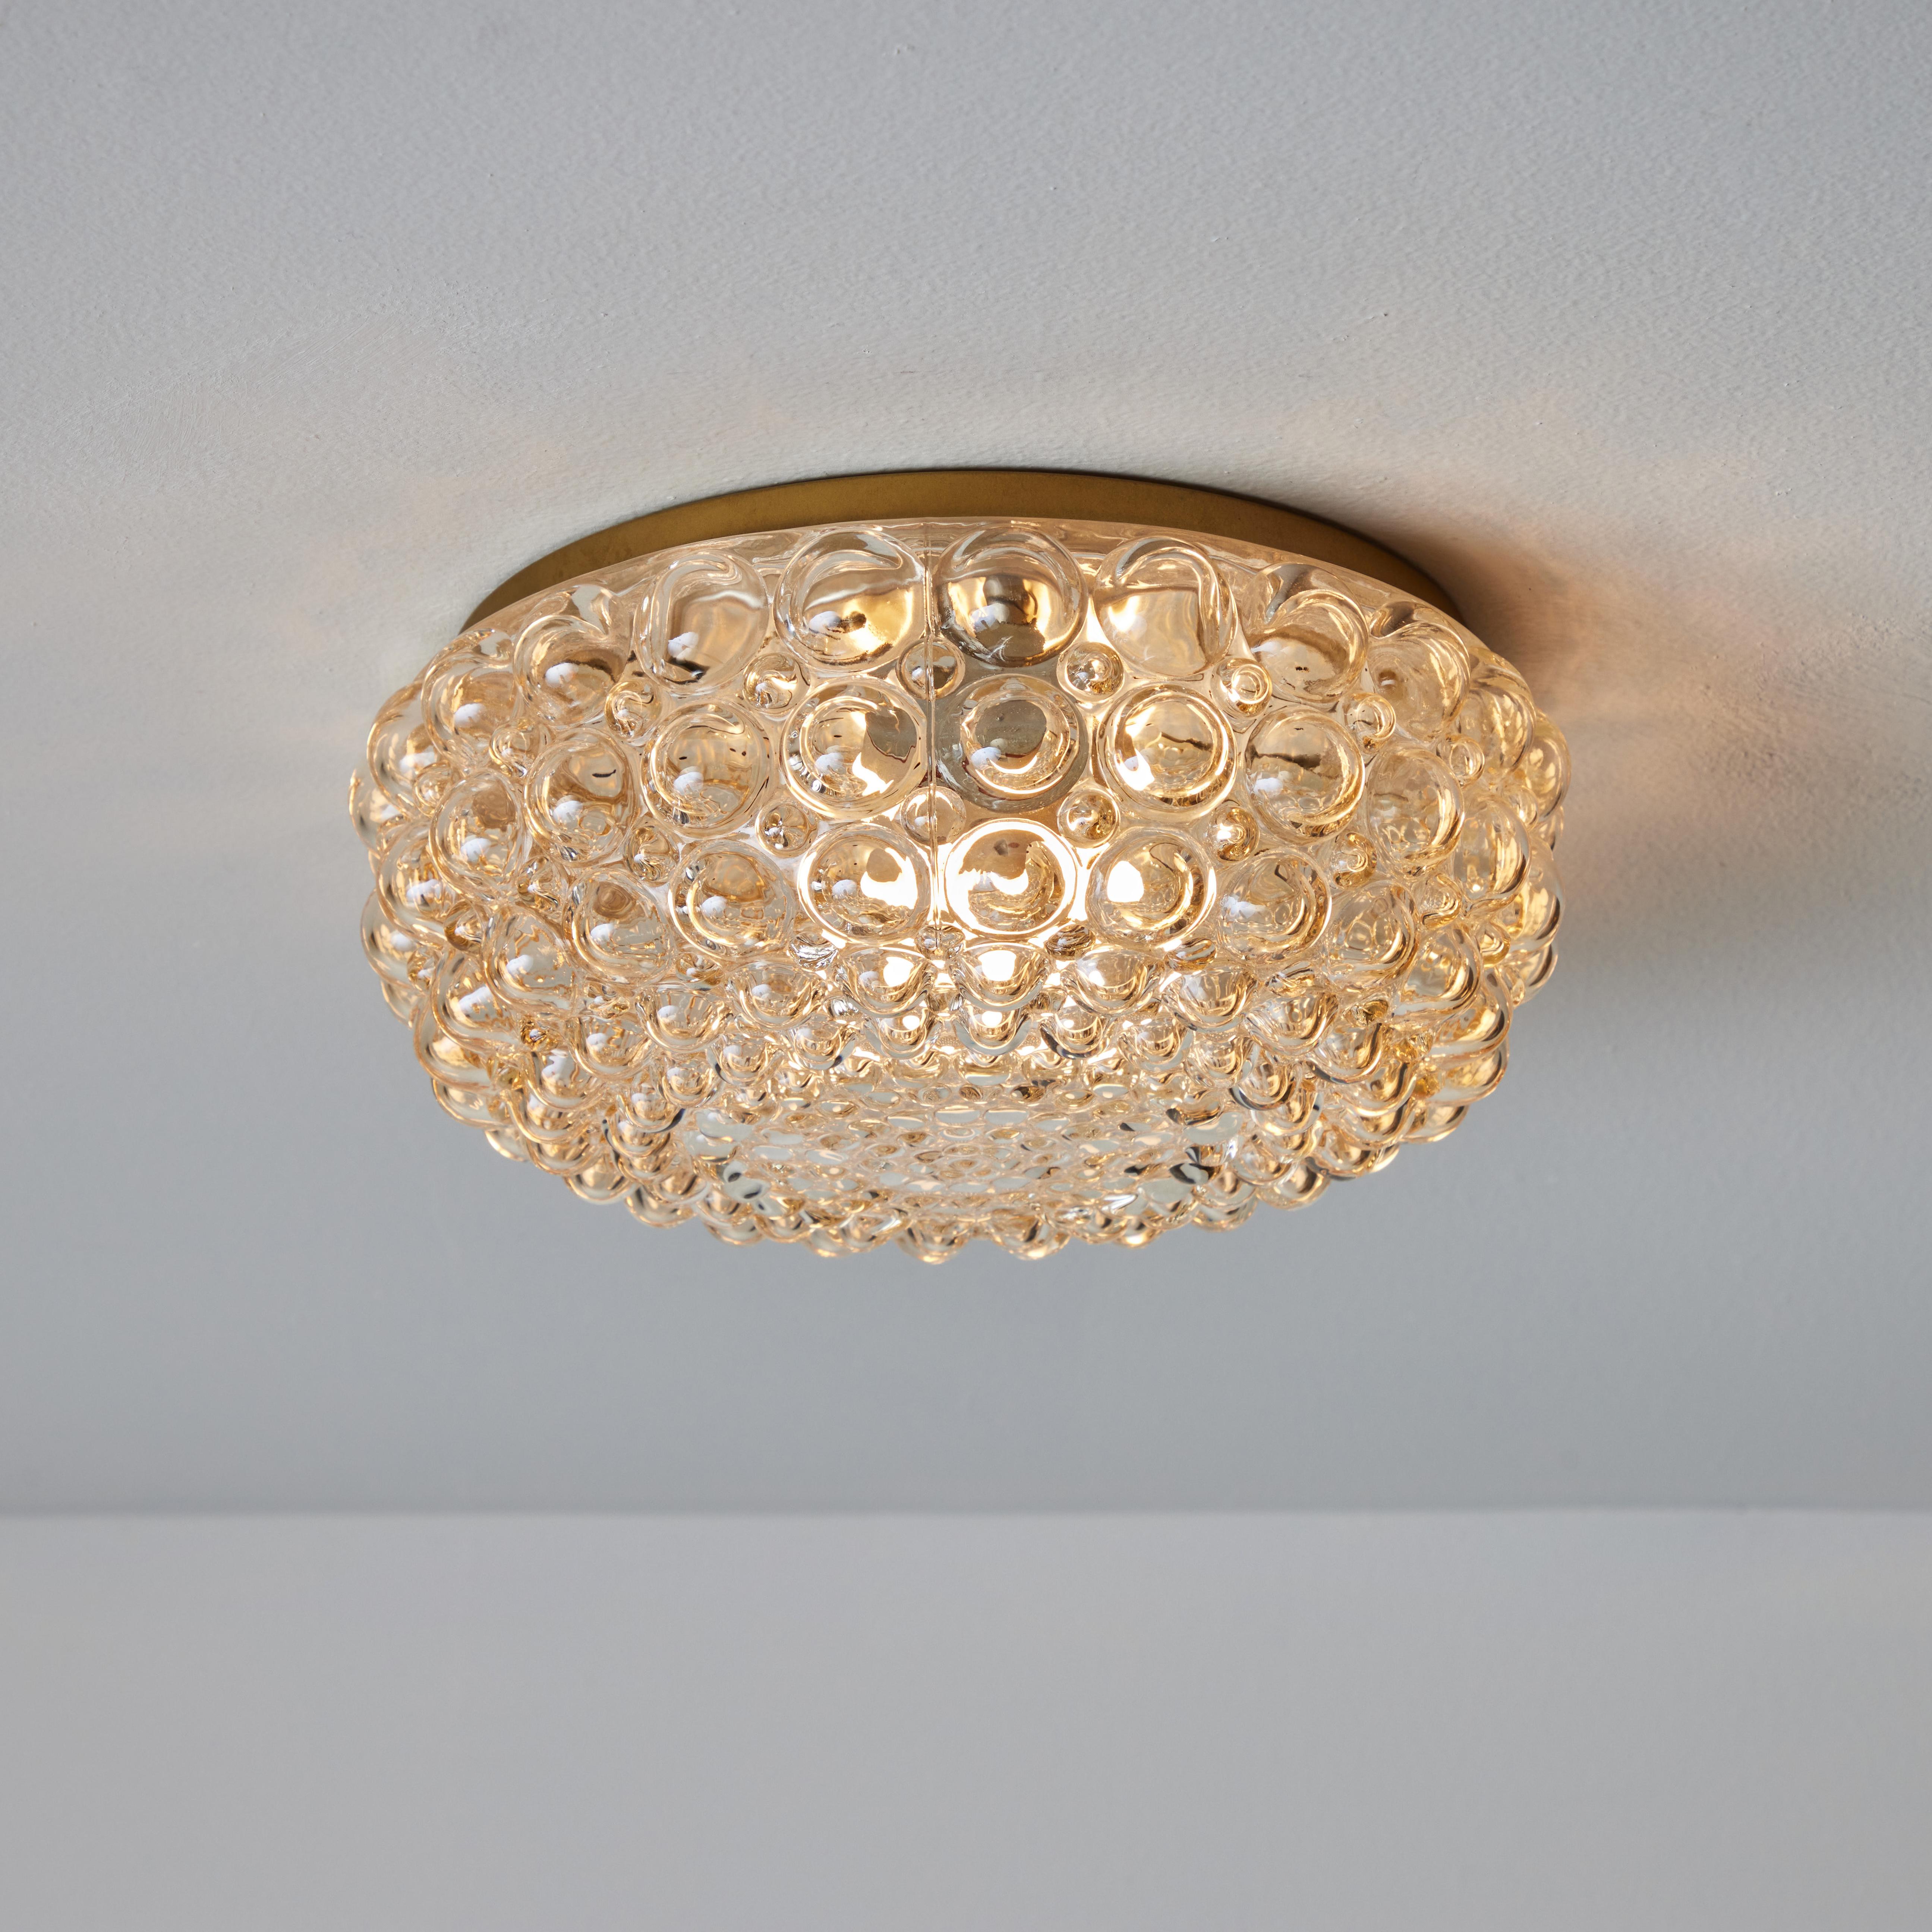 1960s Helena Tynell Model #A665 Bubble Glass Lamp for Limburg. Executed in thick and heavy textured bubble glass with brass finished metal mounting structure. Can be used as a wall lamp or flush mount. Produced in Limburg, Germany circa the